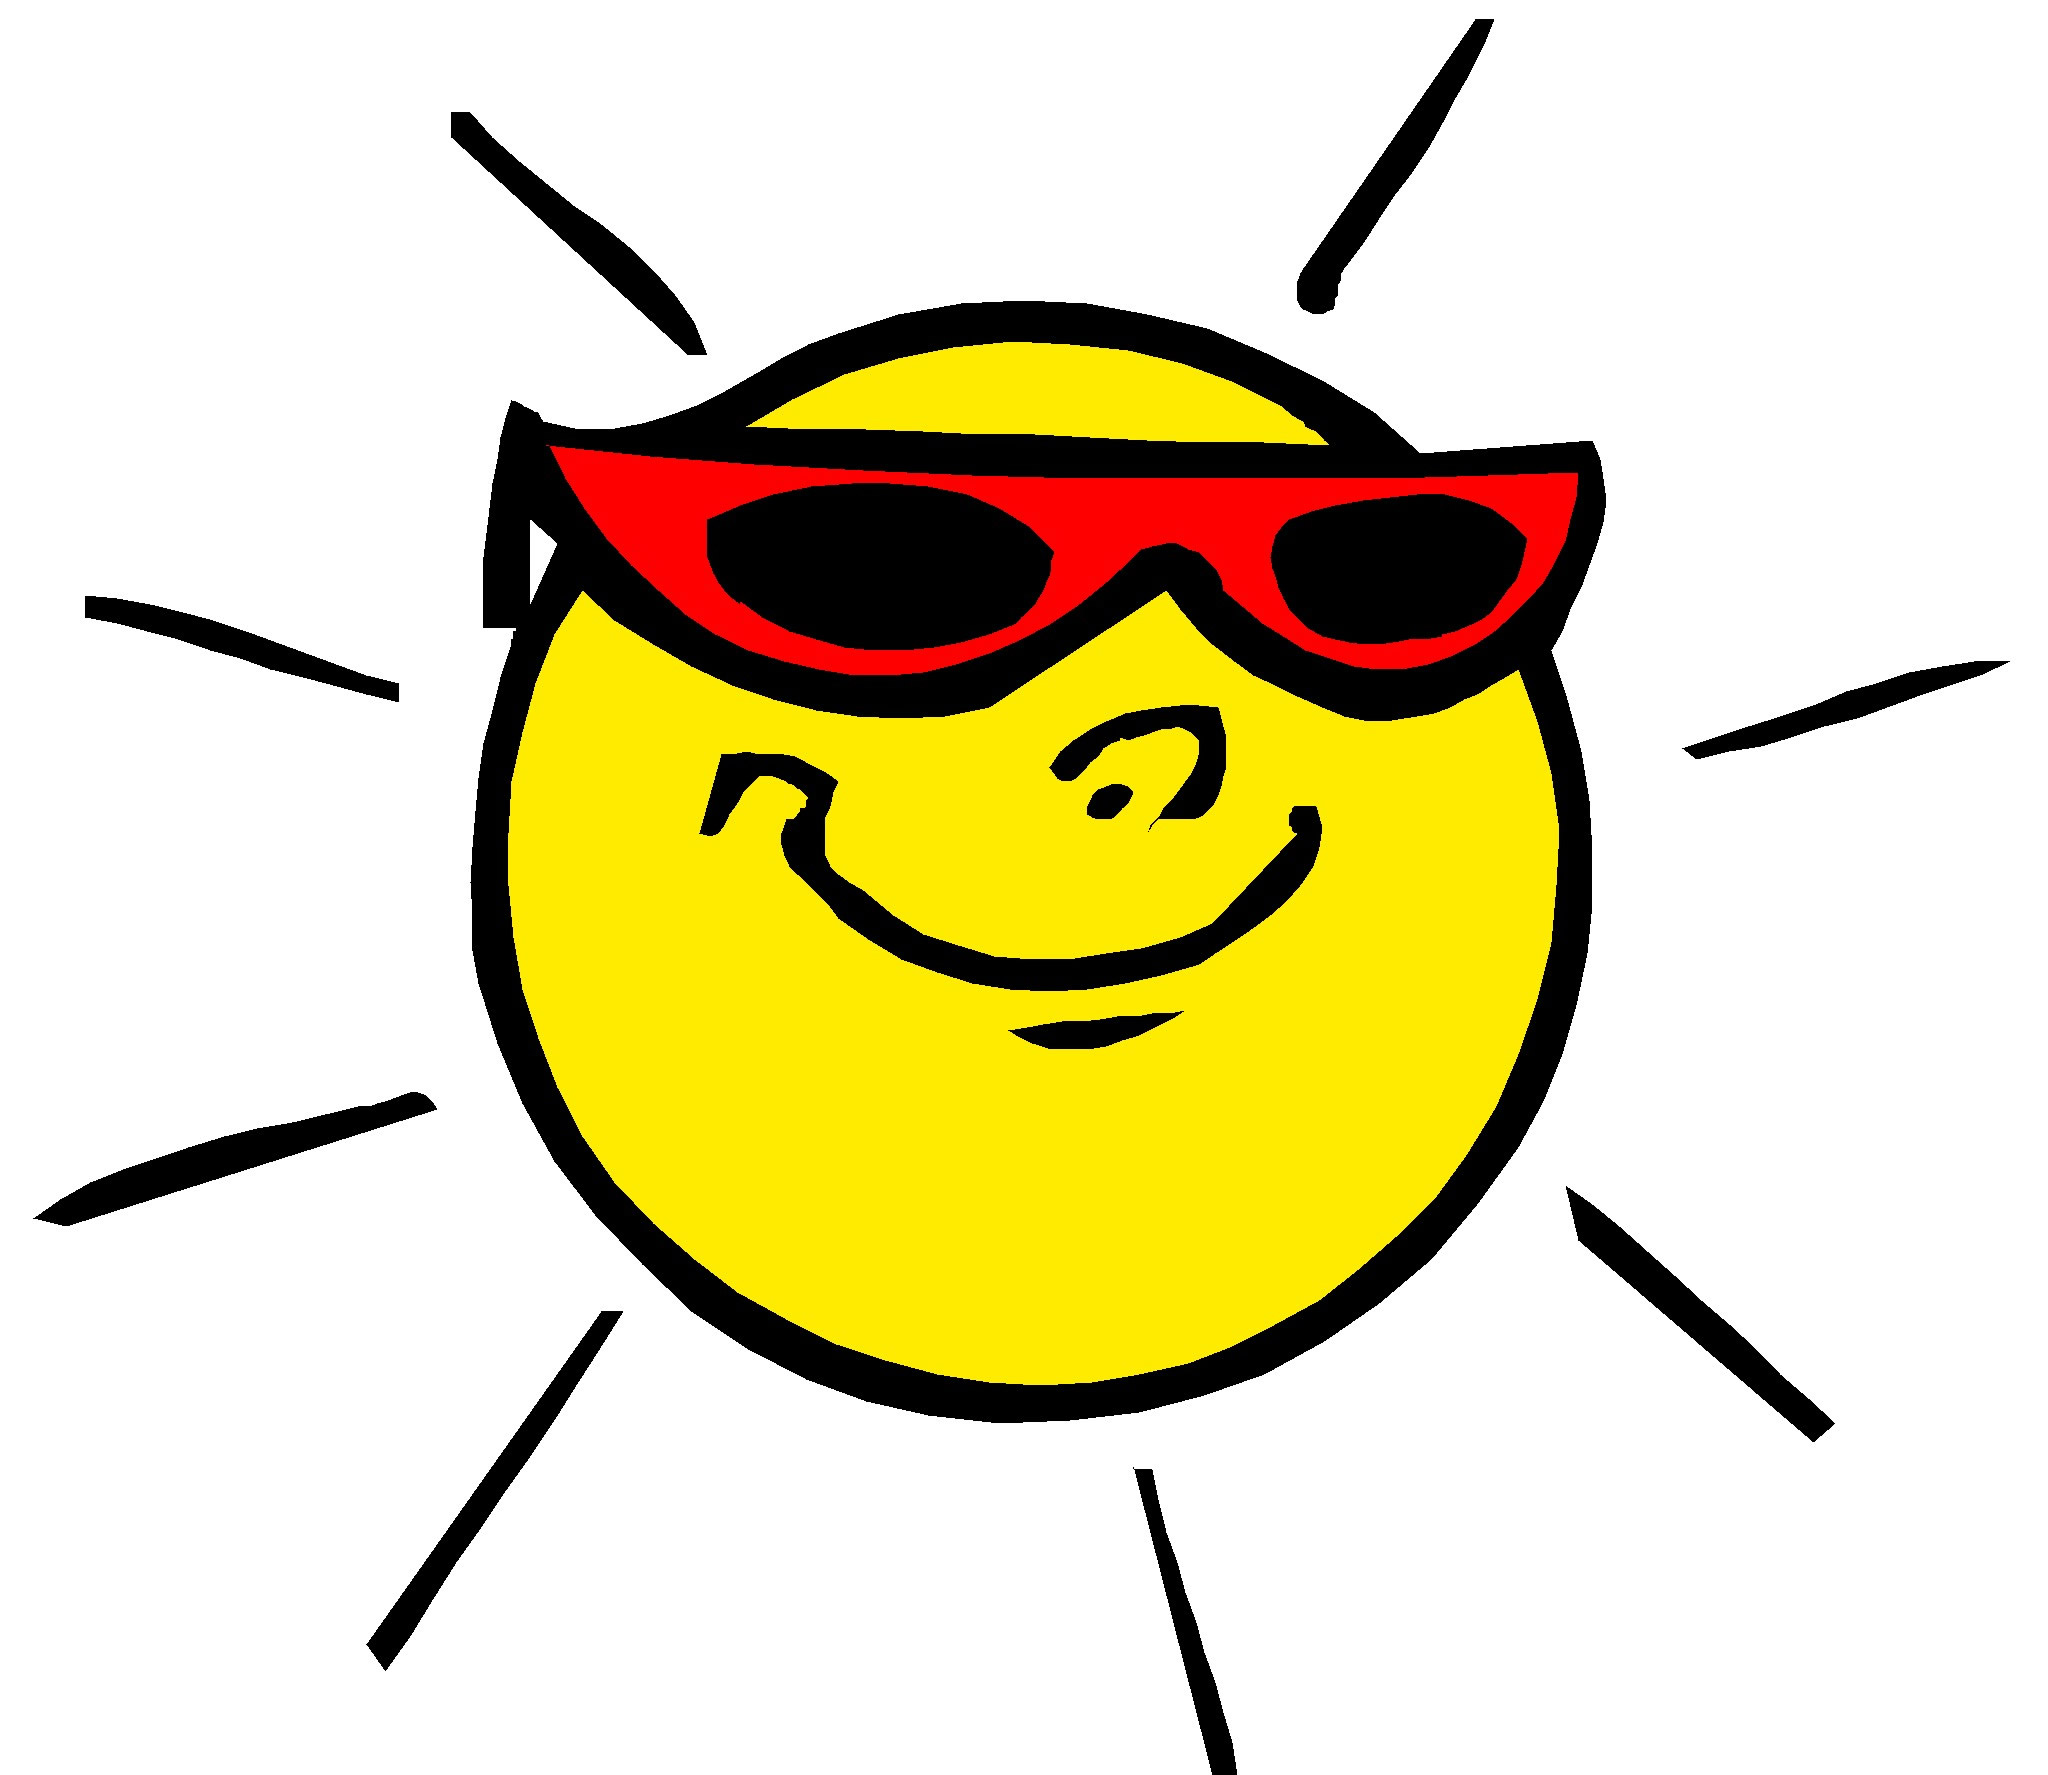 Free animated pictures download. Moving clipart summer